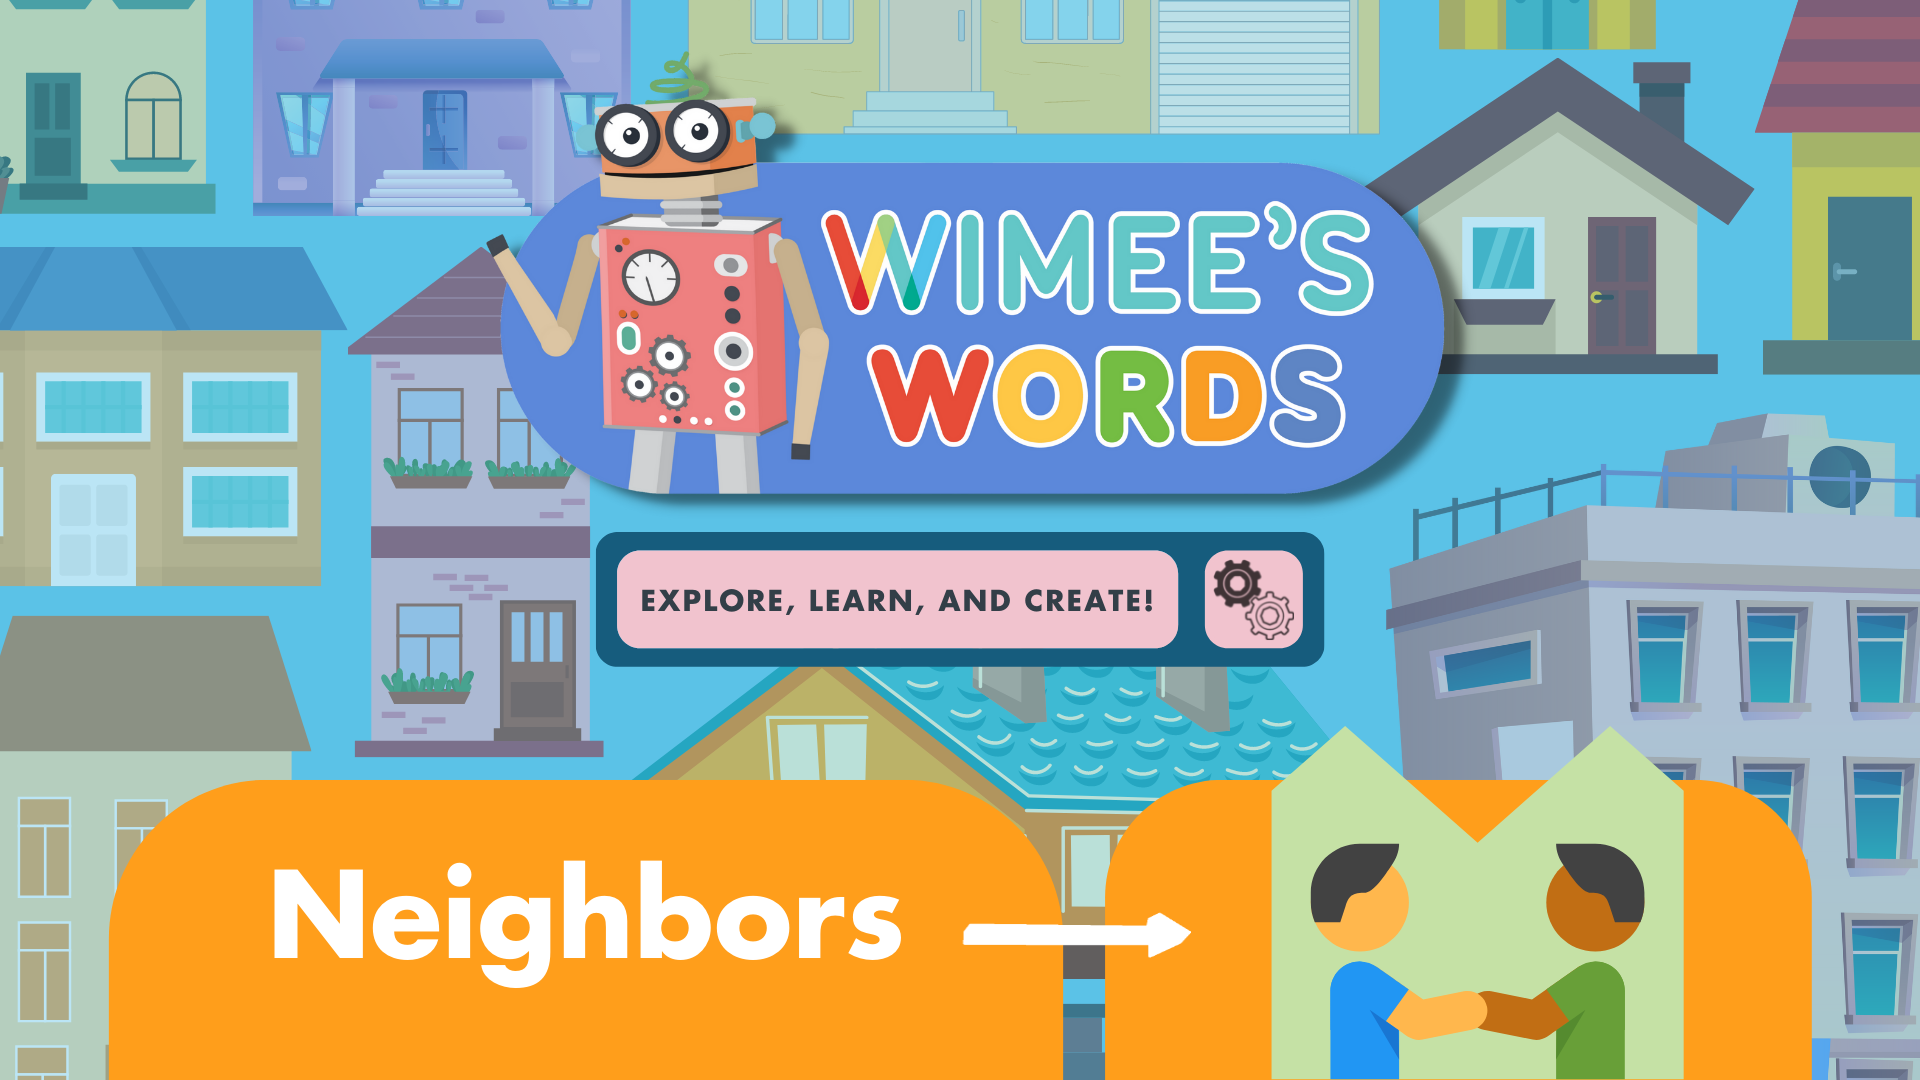 A graphic background of differnt types of houses. The Wimee's Words logo and the title "neighbors" are over the image.